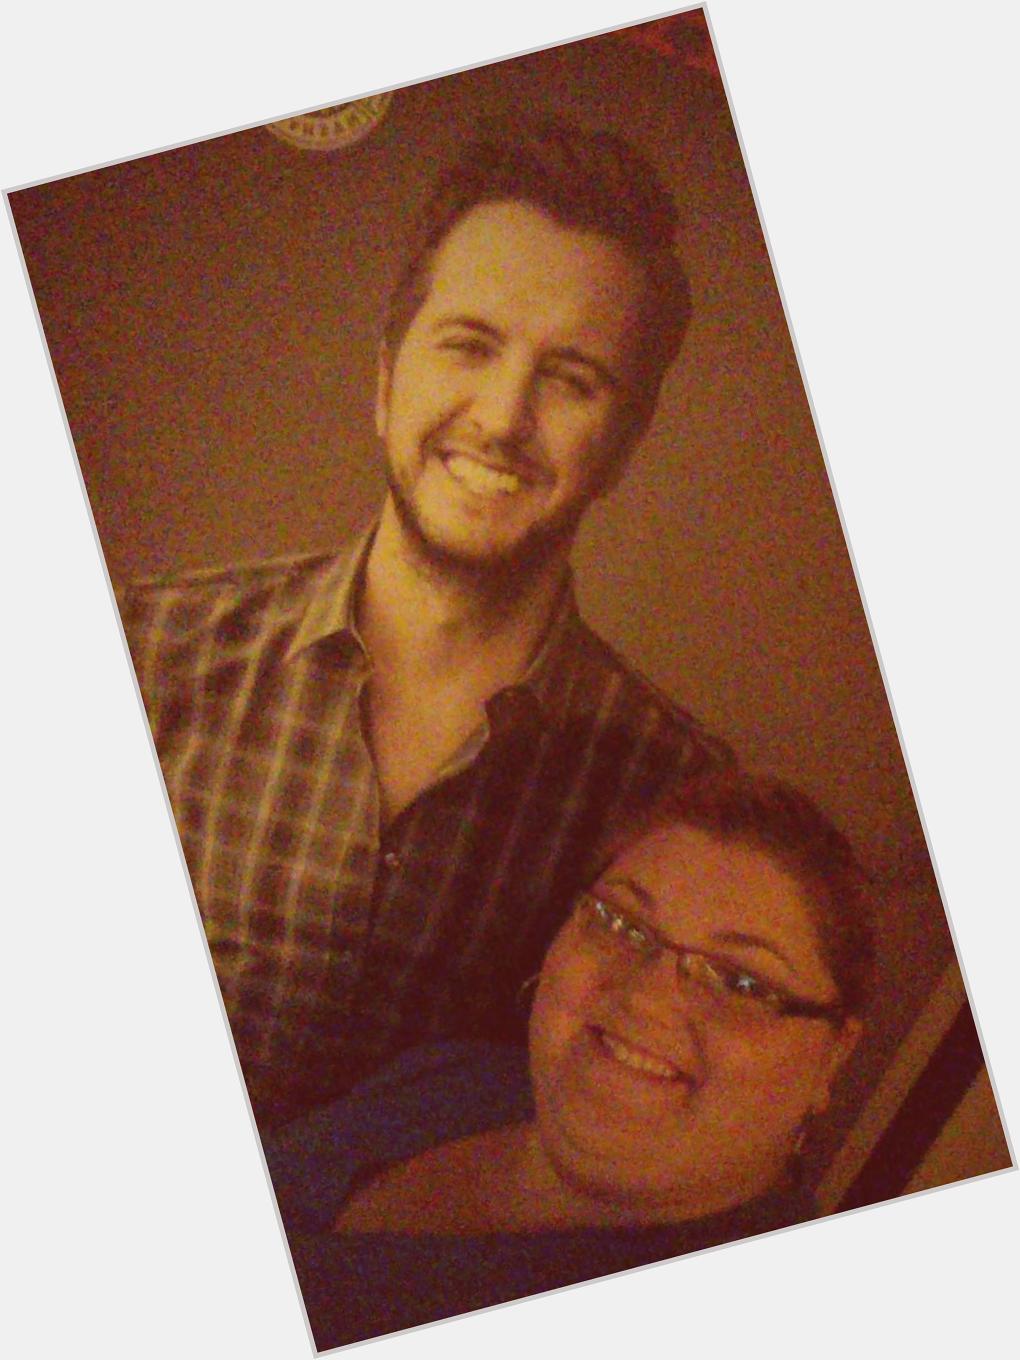 Wishing a Happy Birthday to an AMAZING artist and performer, LUKE BRYAN!!! Much love from KY! 